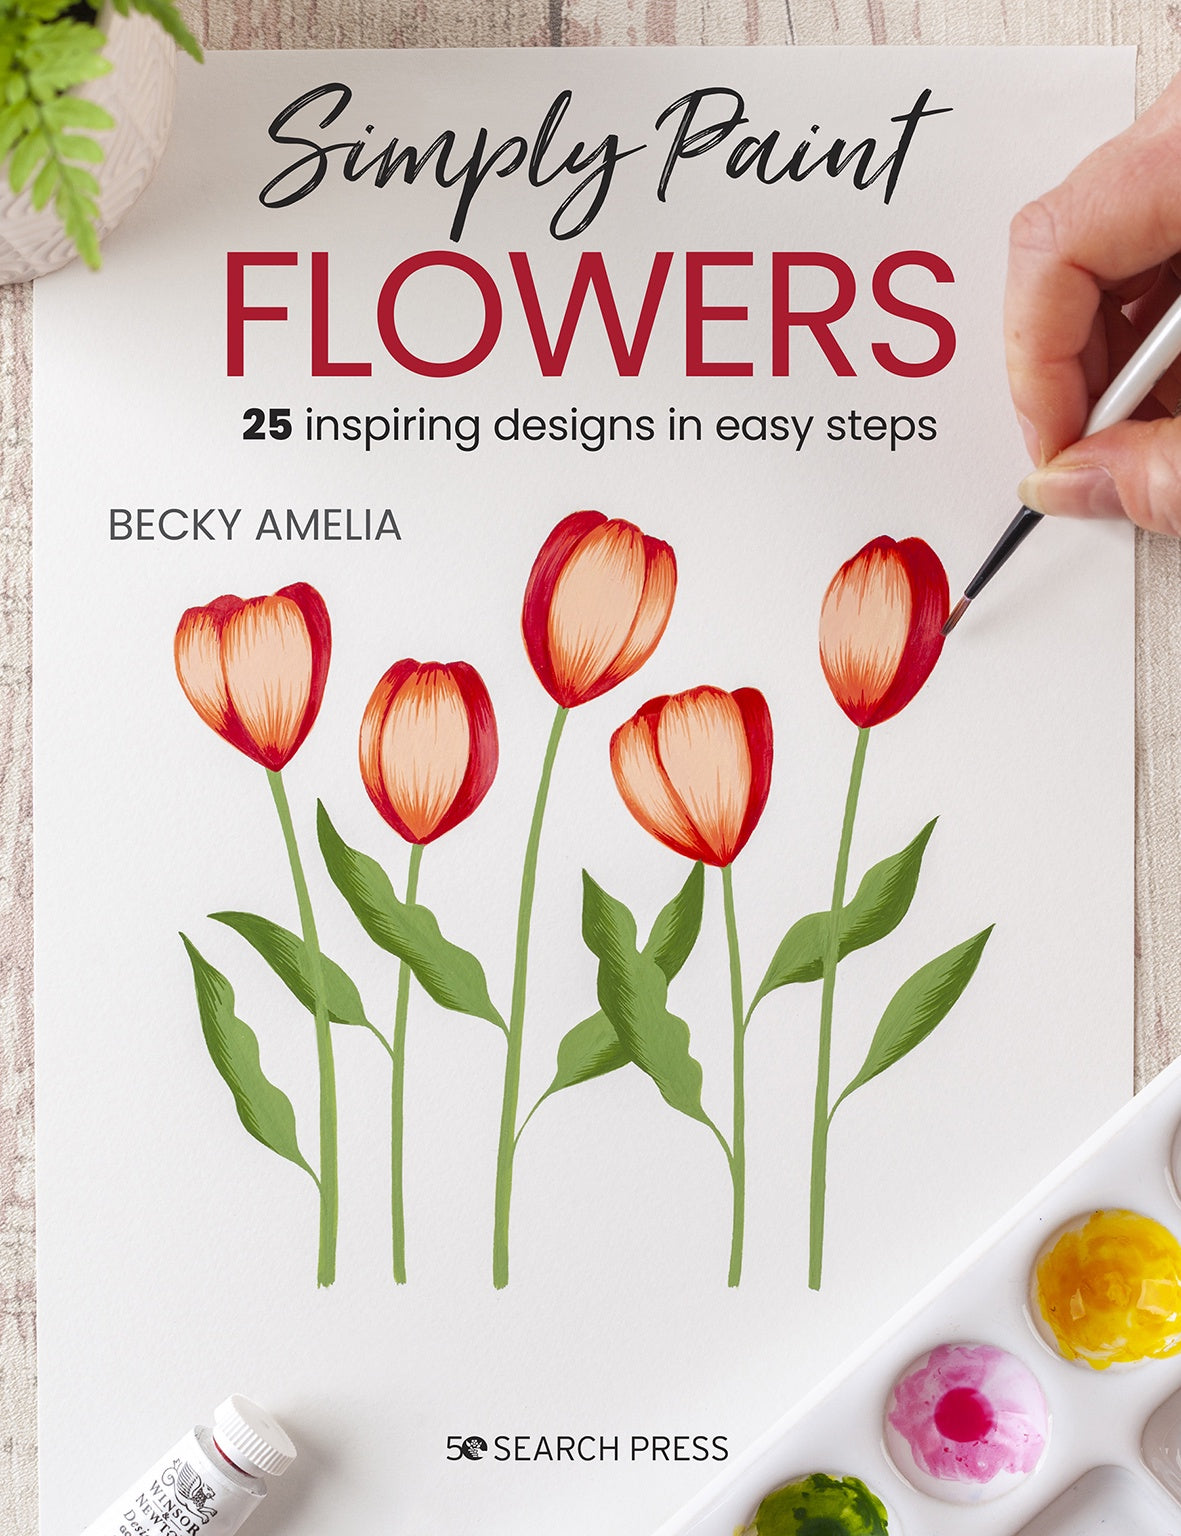 Simply Paint Flowers by Becky Amelia